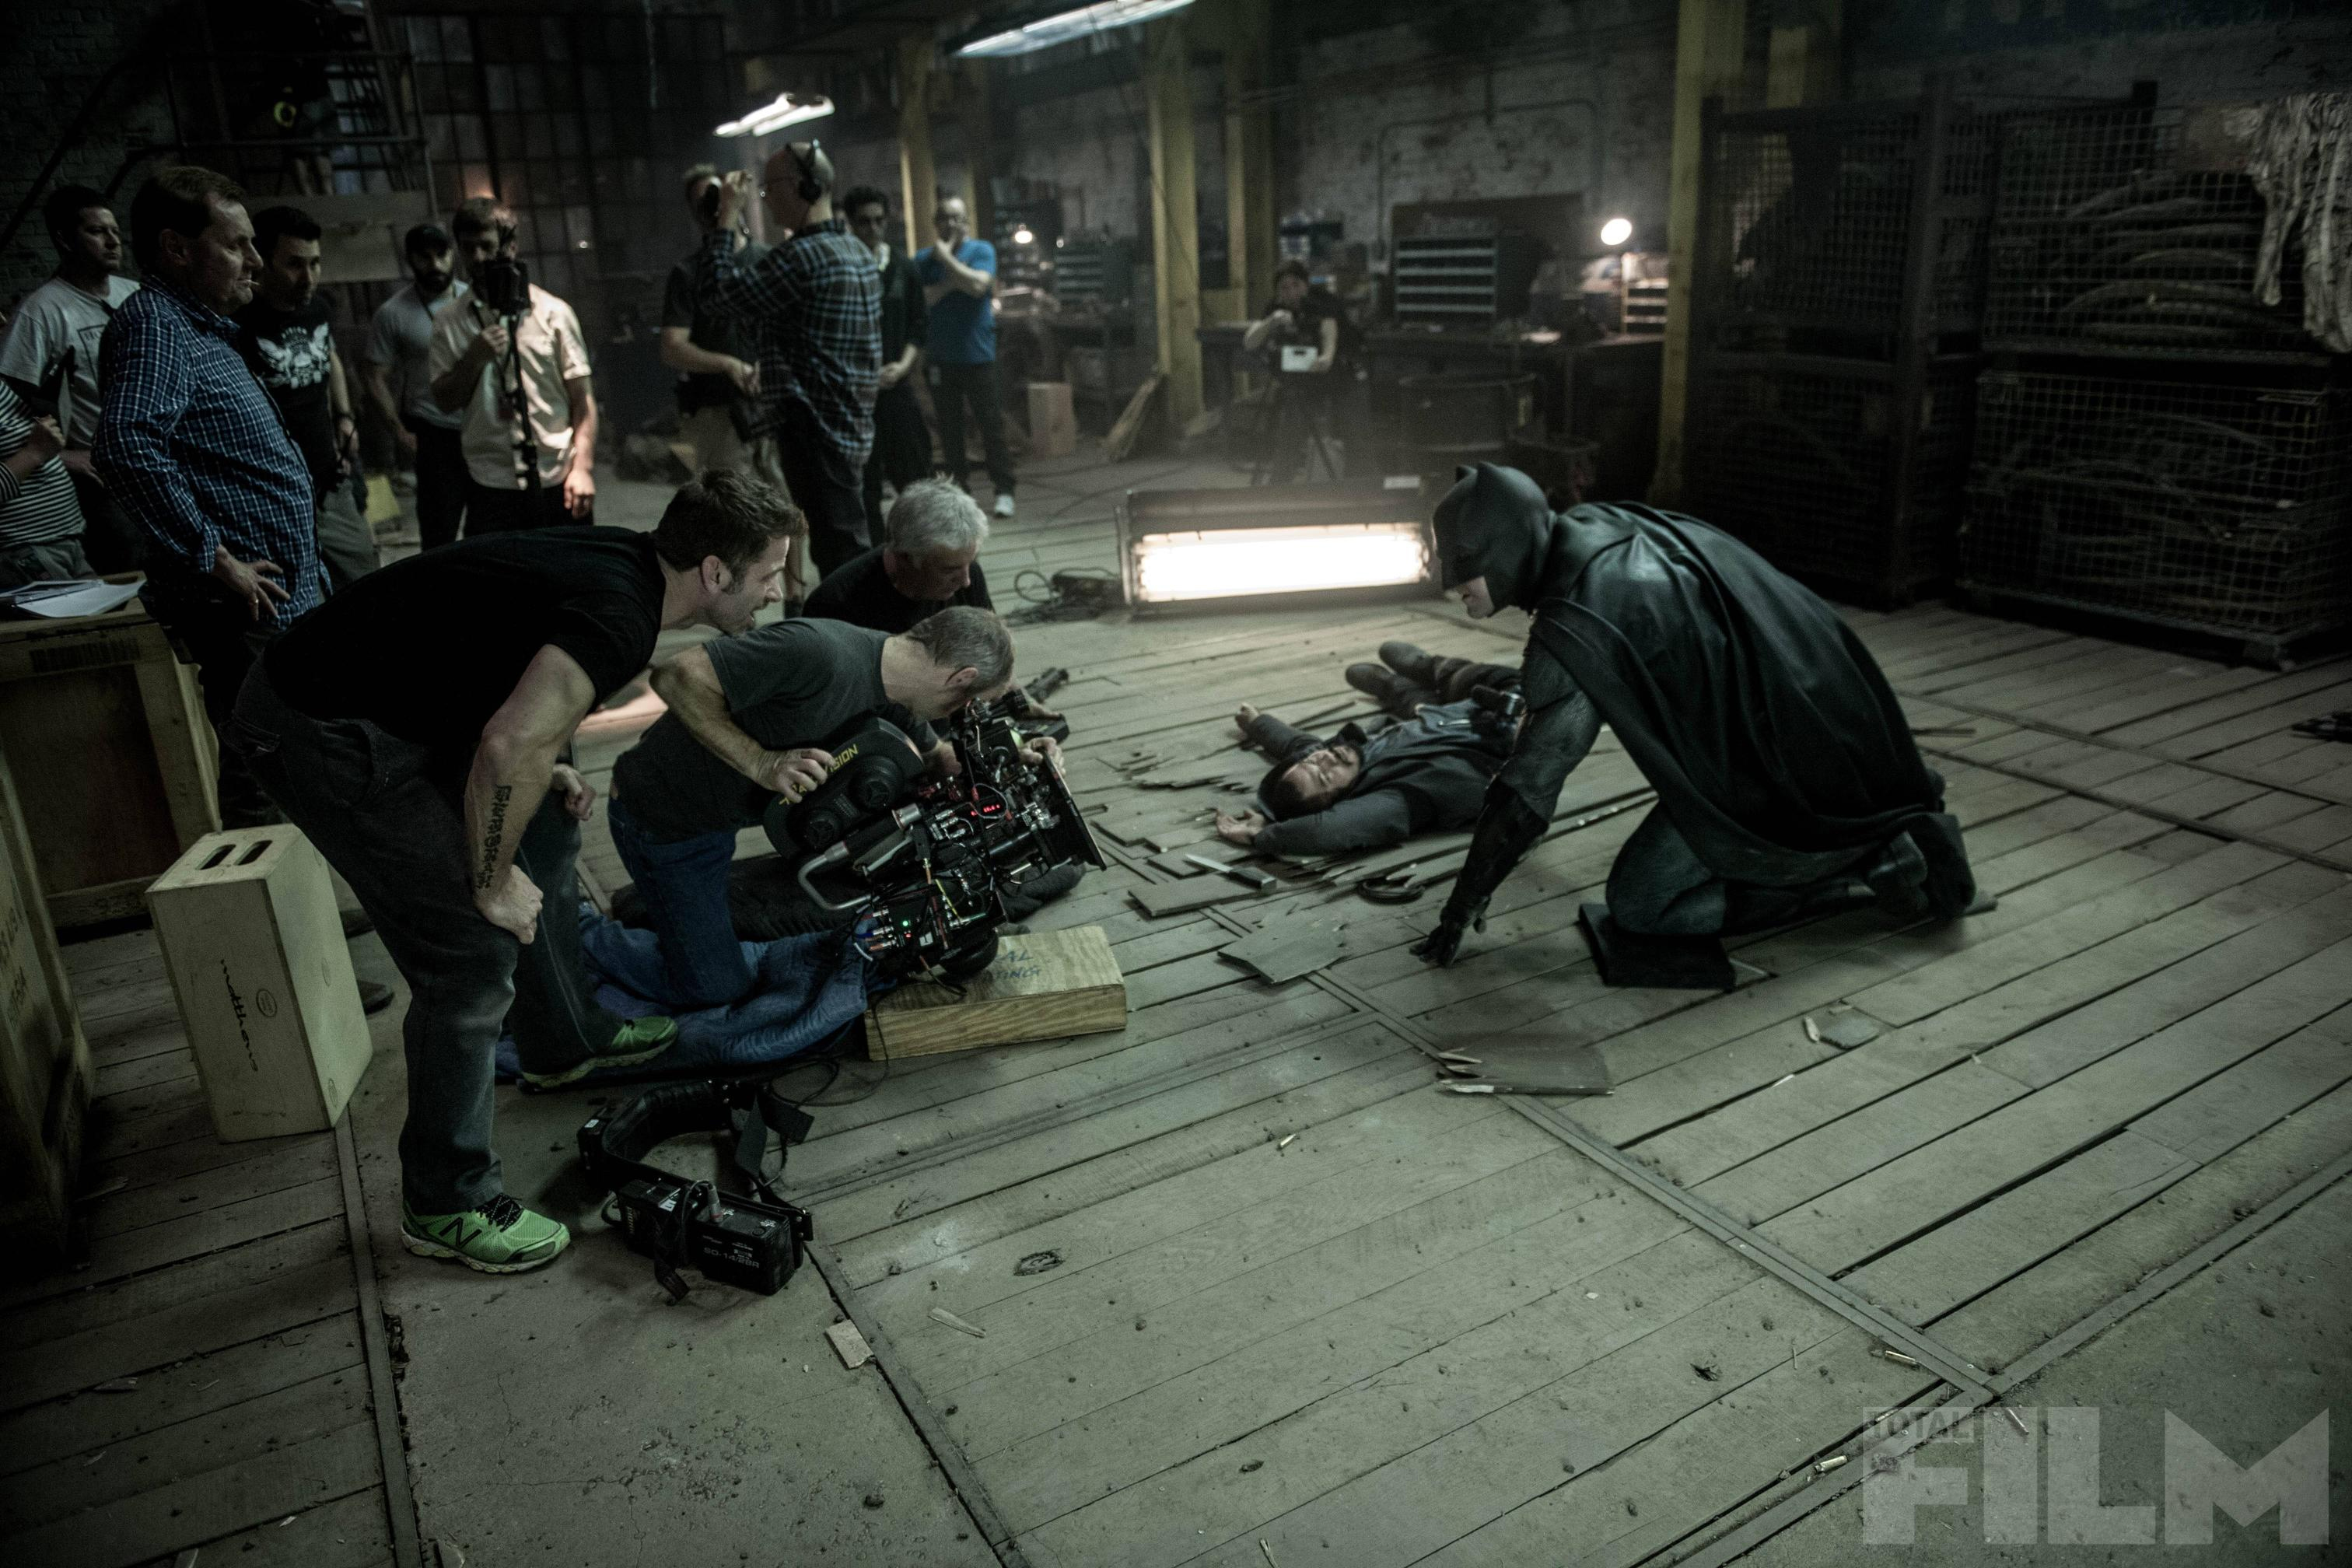 Batman V Superman: Dawn of Justice 307651 Gallery, Images, Posters ...